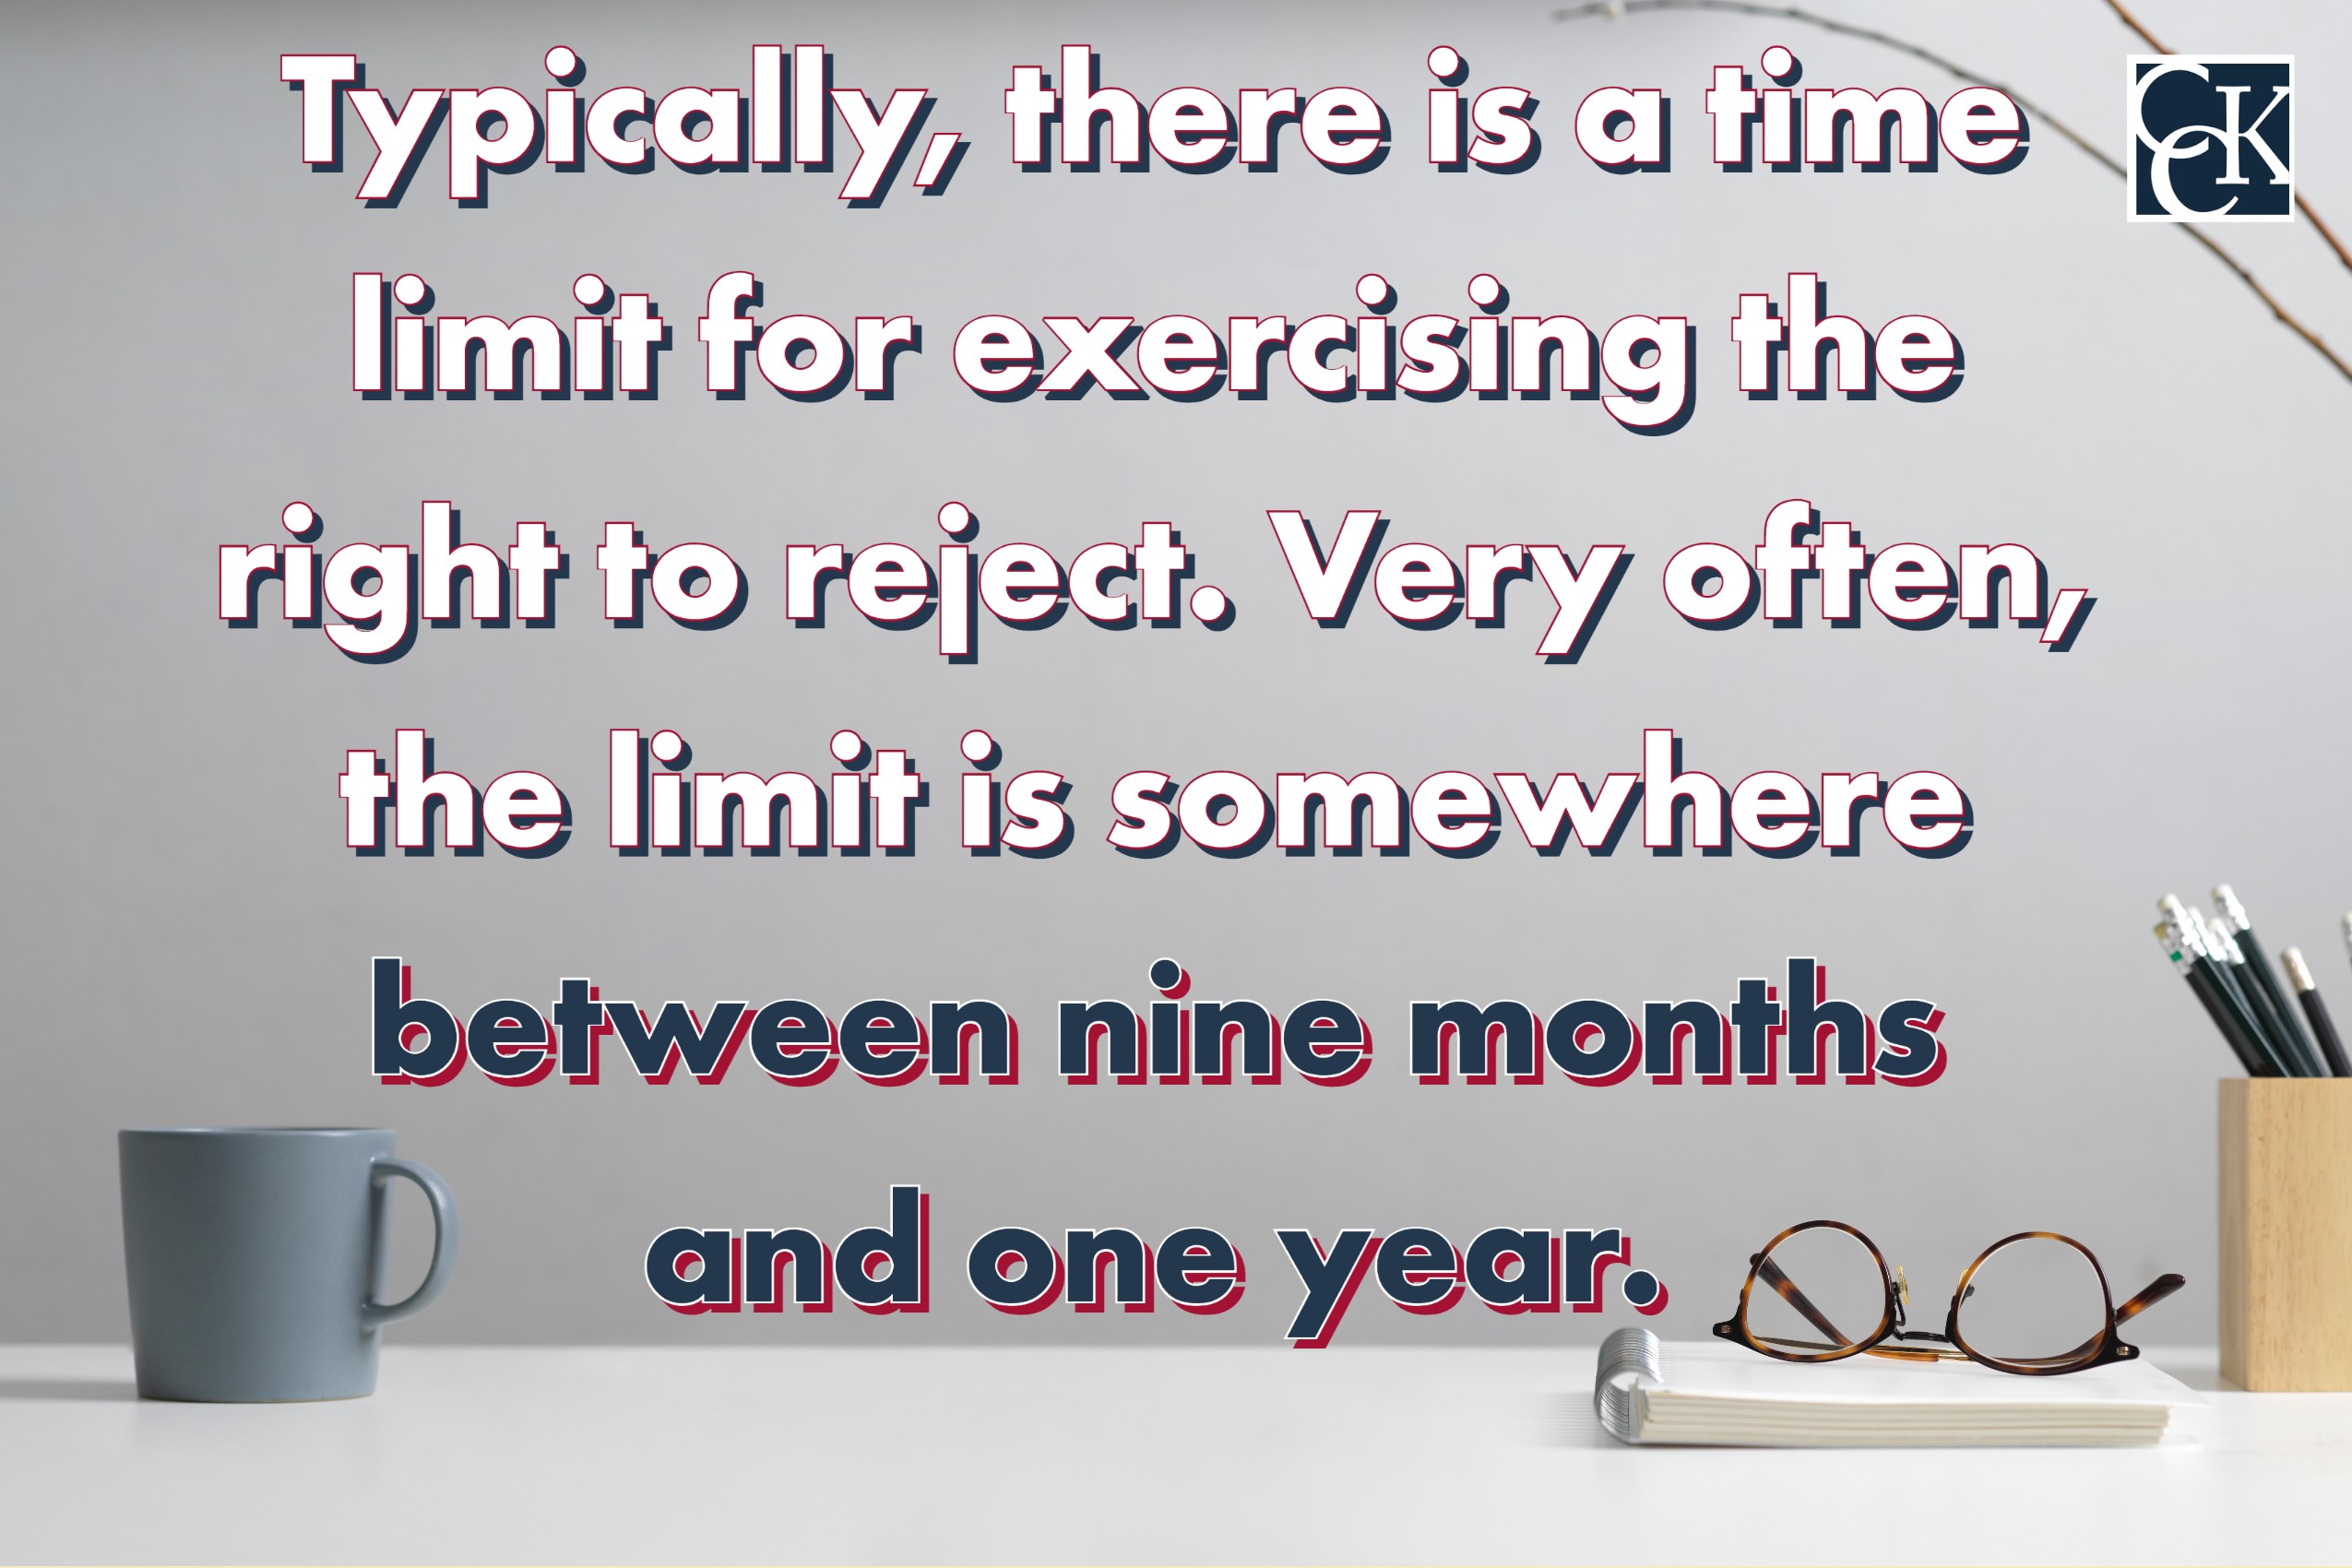 Typically, there is a time limit for exercising the right to reject.  Very often, the limit is somewhere between nine months and one year.